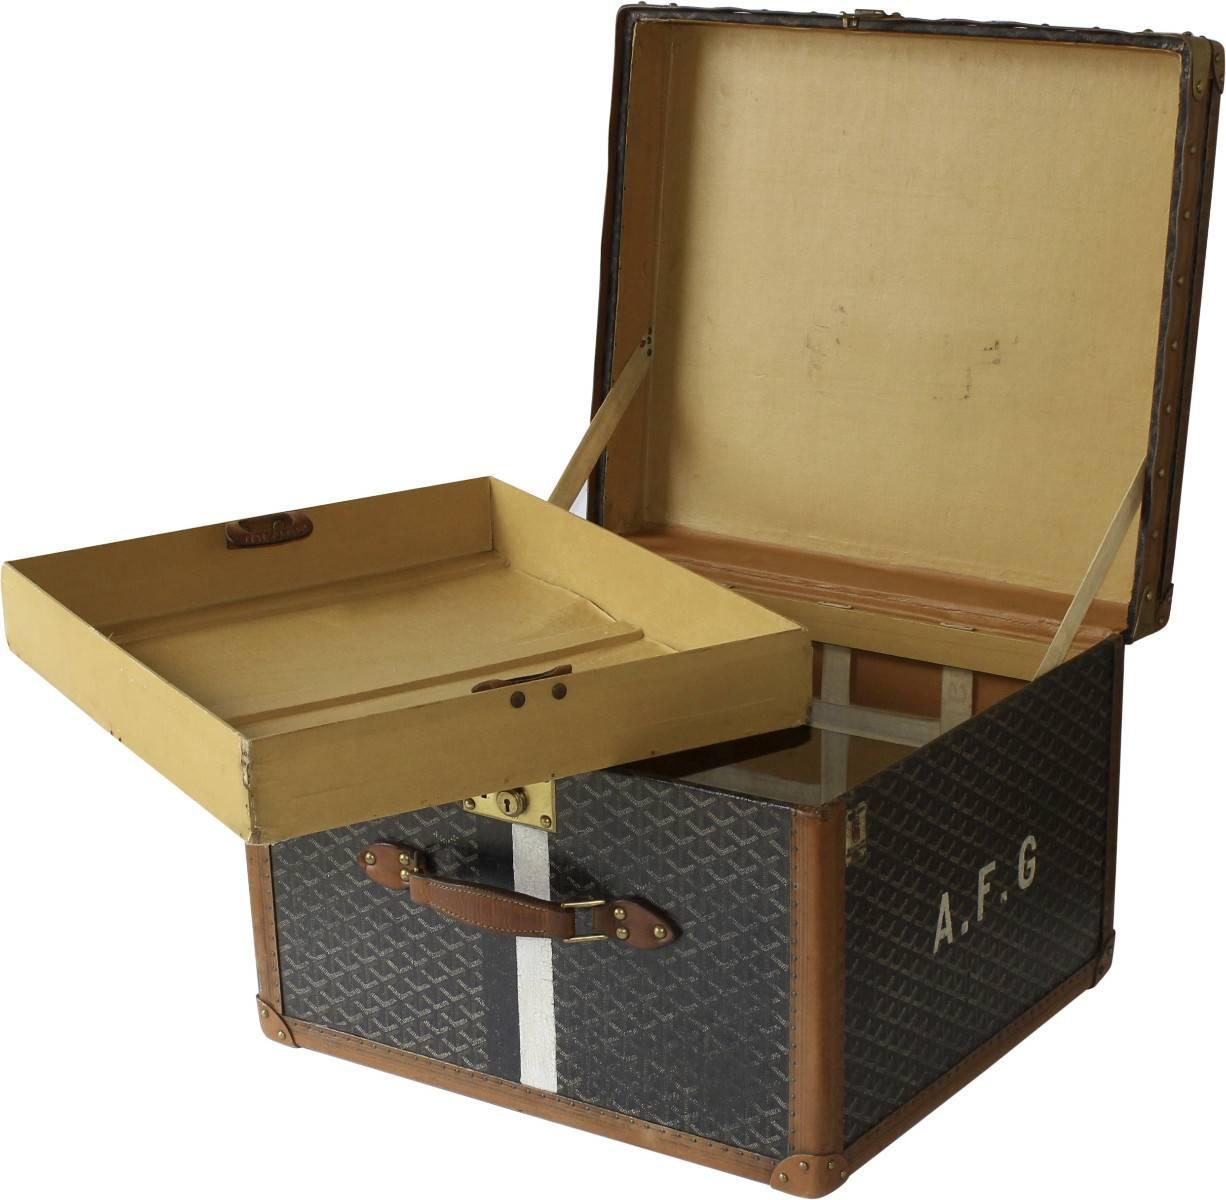 Hat box, circa 1920s this stunning Goyard example would make a statement in any fashionable home, finished in the traditional Goyard print and brass hardware this is a true collectors item.
 